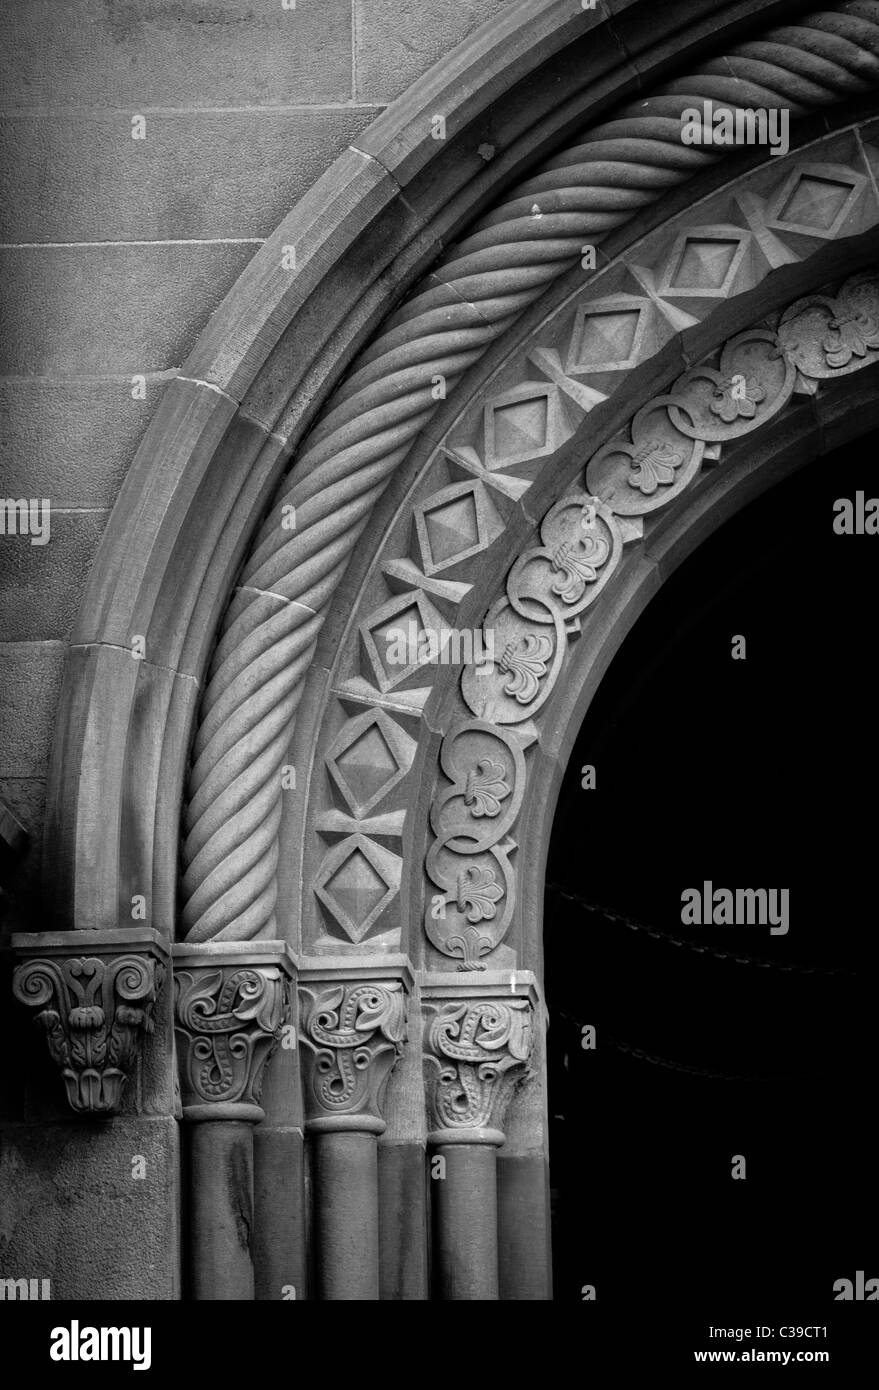 Architectural detail from the Smithsonian Castle on the National Mall in Washington, DC Stock Photo